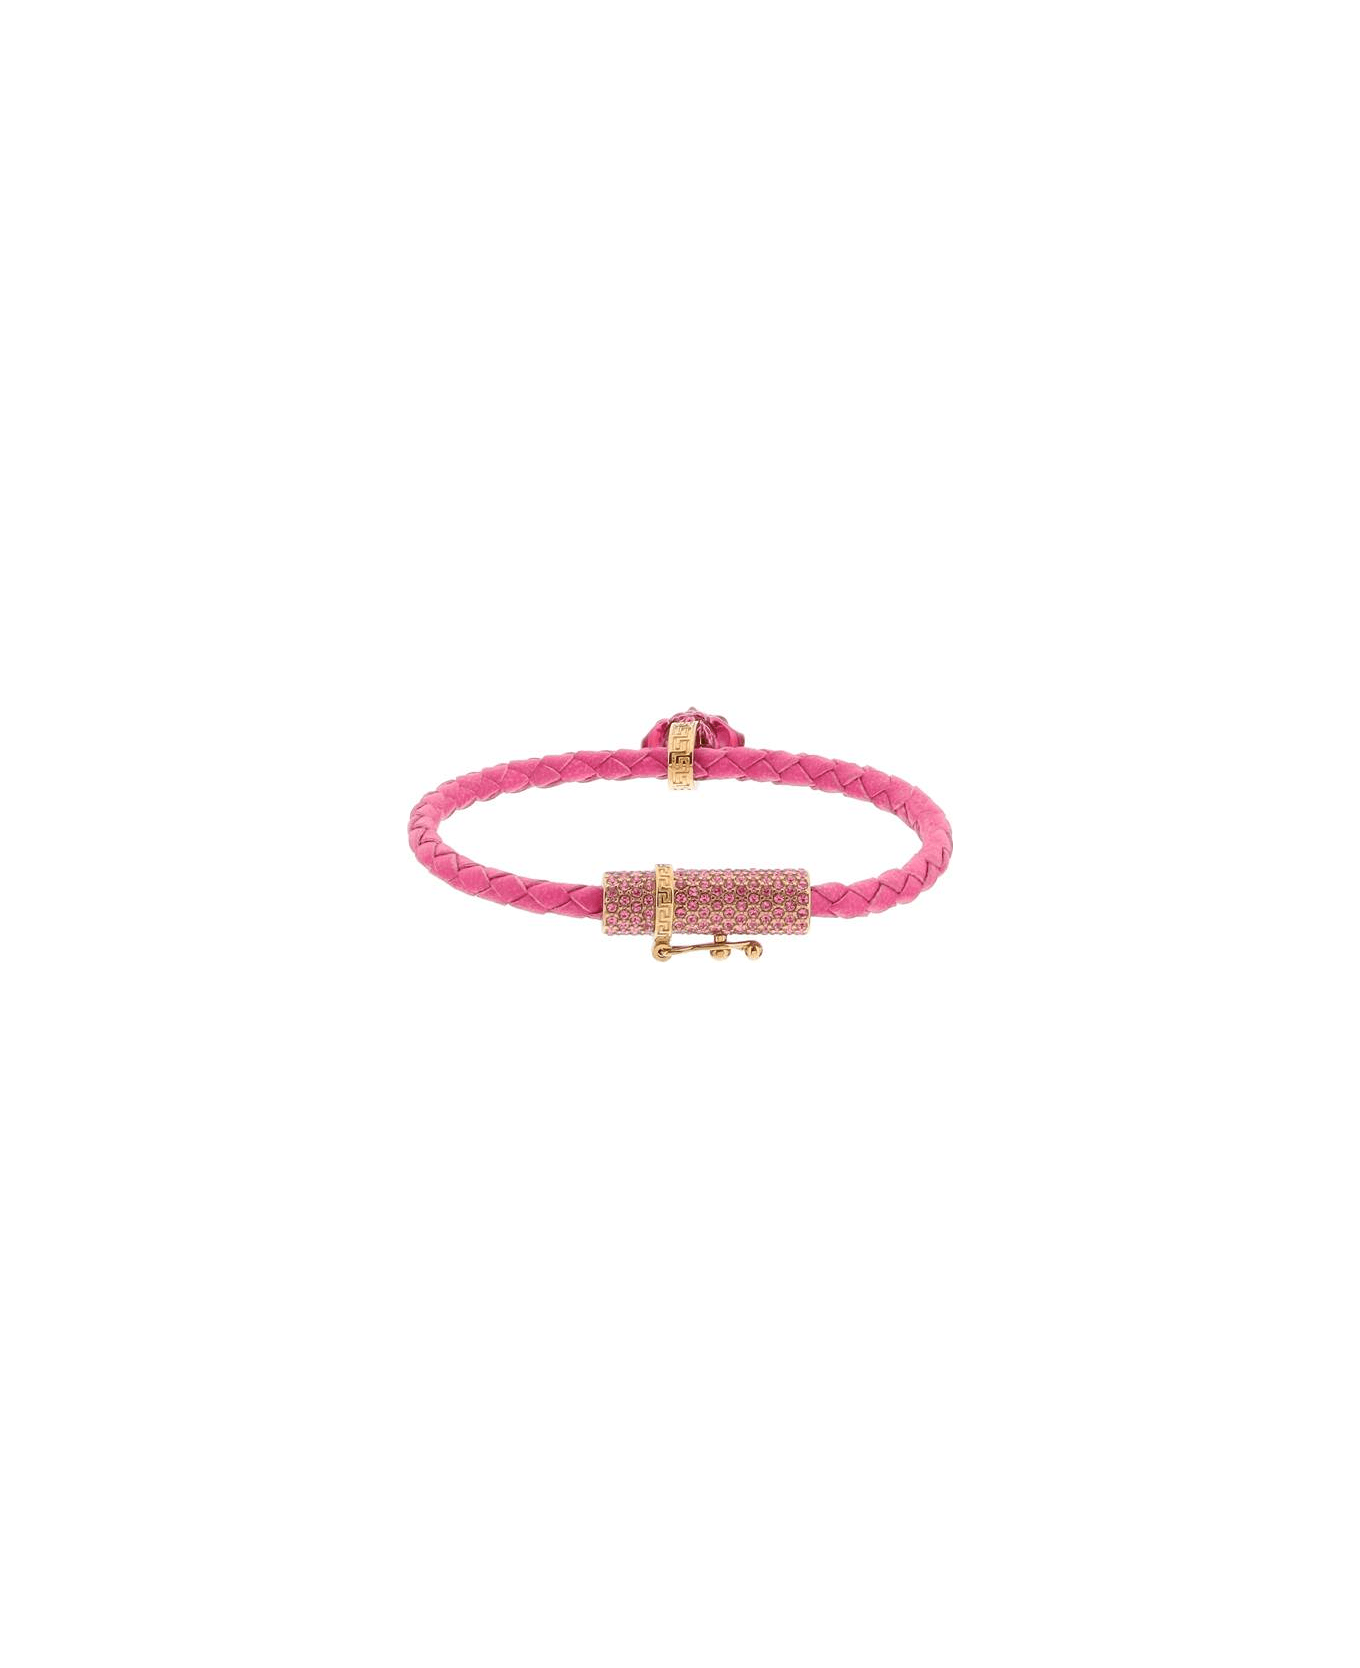 Versace Braided Leather Bracelet - Glossy Pink-oro Versace